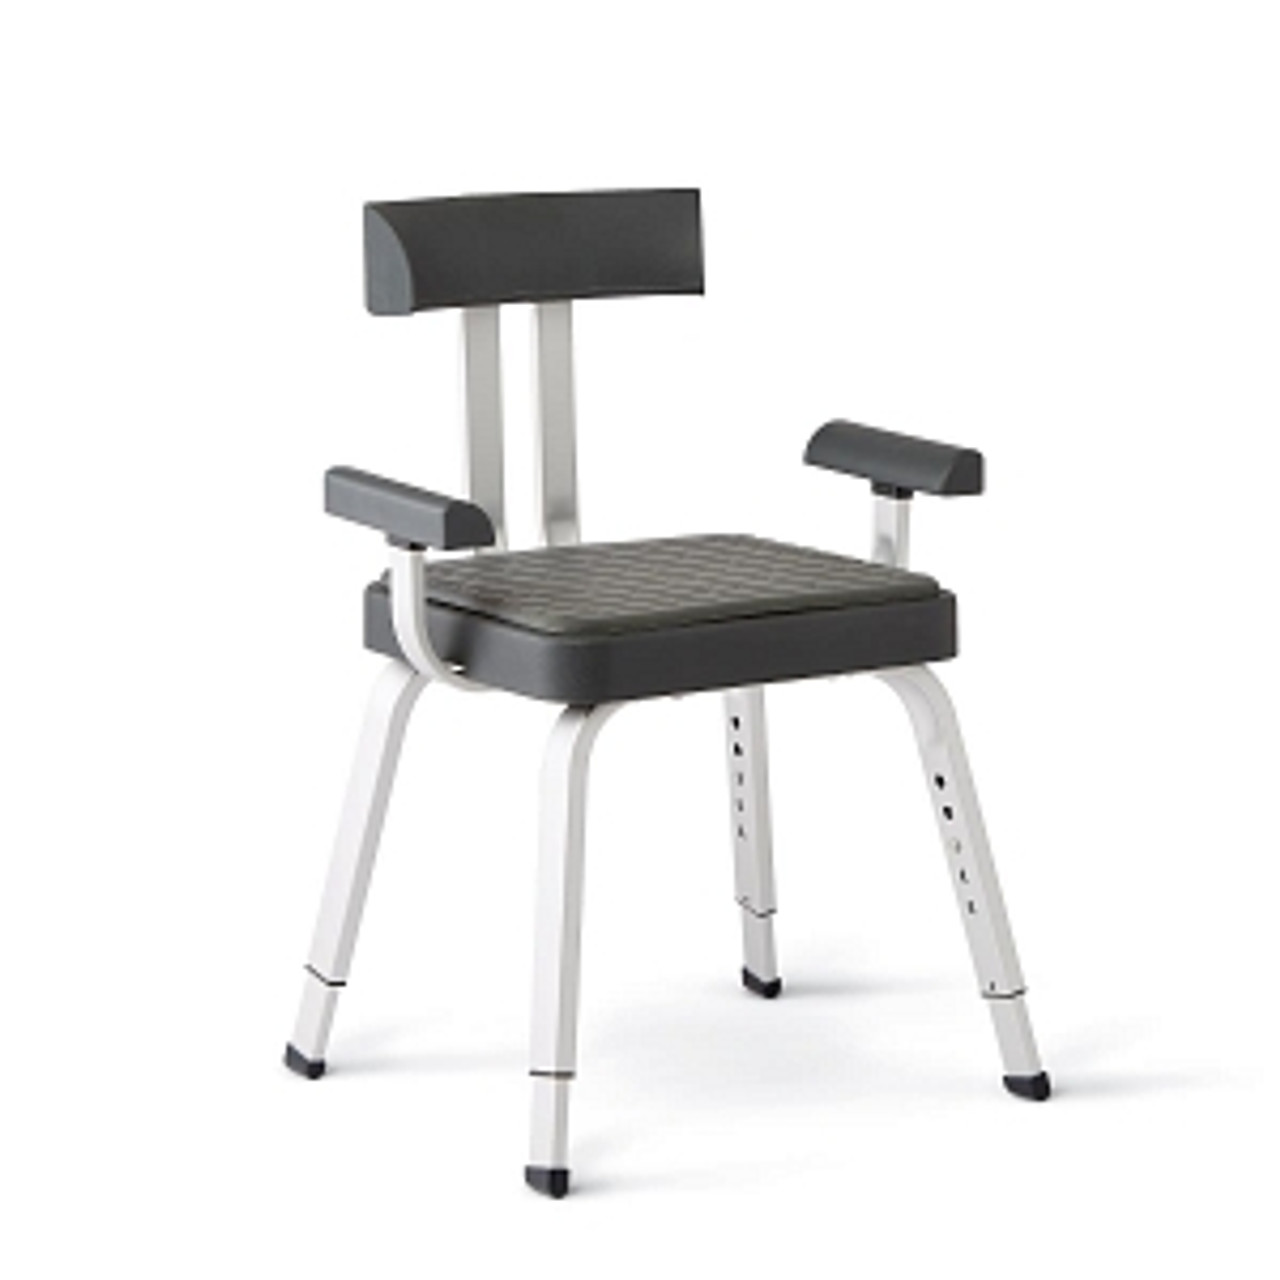 Momentum shower chair with Microban* antimicrobial treatment
Comes with armrests, backrest, padded seat, and slip-resistant feet
Supports up to 250 lb.
Comes in retail packaging

*These antimicrobial properties are built in to protect the product. The product does not protect users or others against bacteria, viruses, germs or other disease-causing organisms.